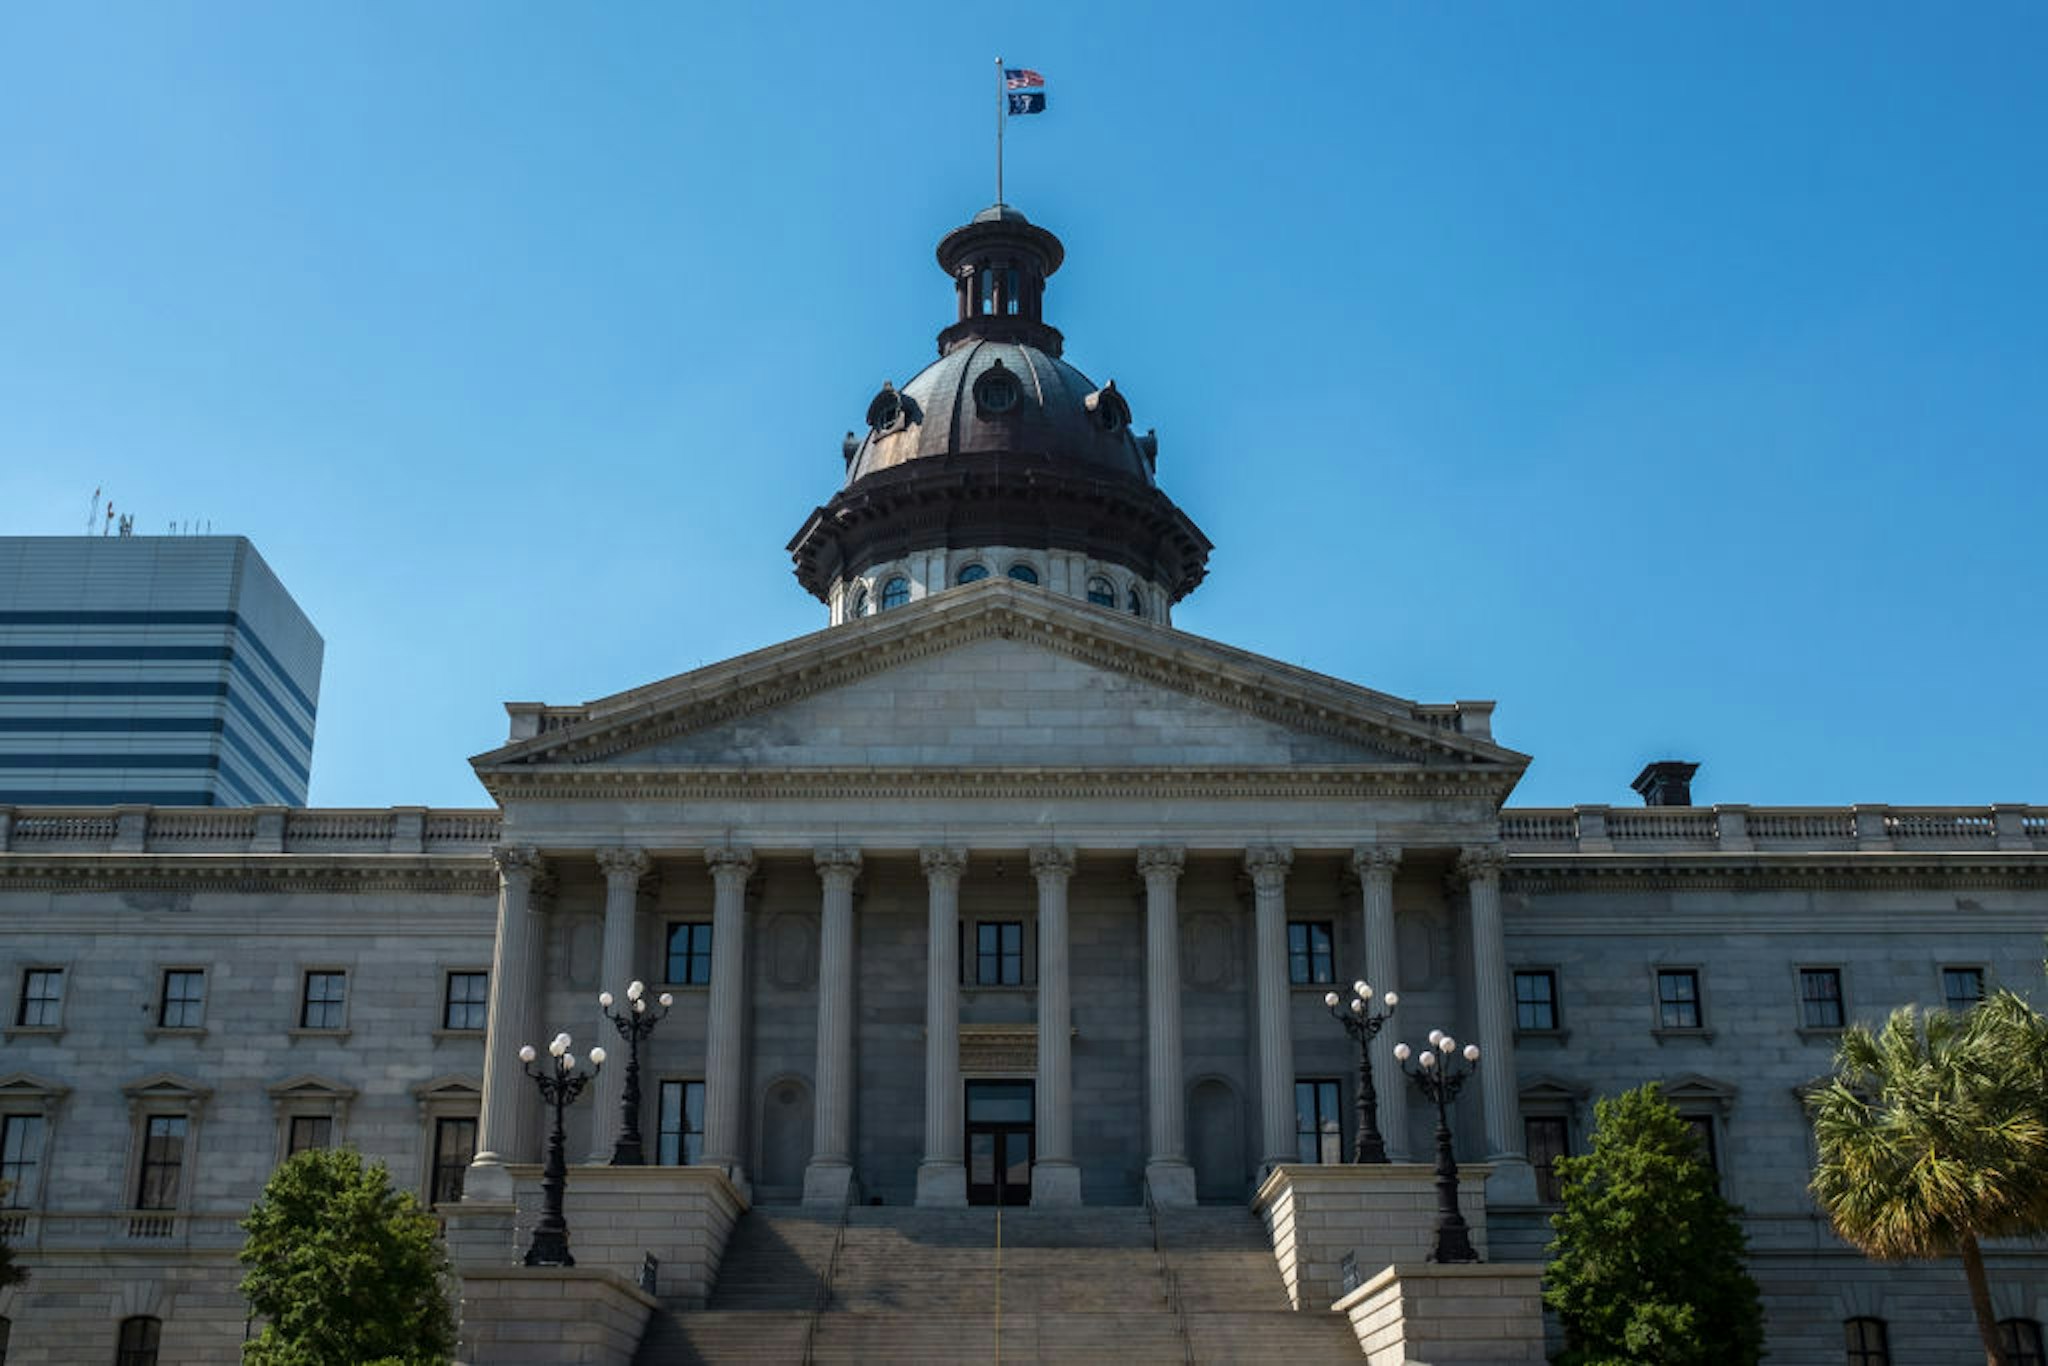 An exterior view of the South Carolina State House, Columbia - construction work first began in 1851 and was completed in 1907, it was designated a national historic landmark in 1976 for its significance in the post-civil war reconstruction era.